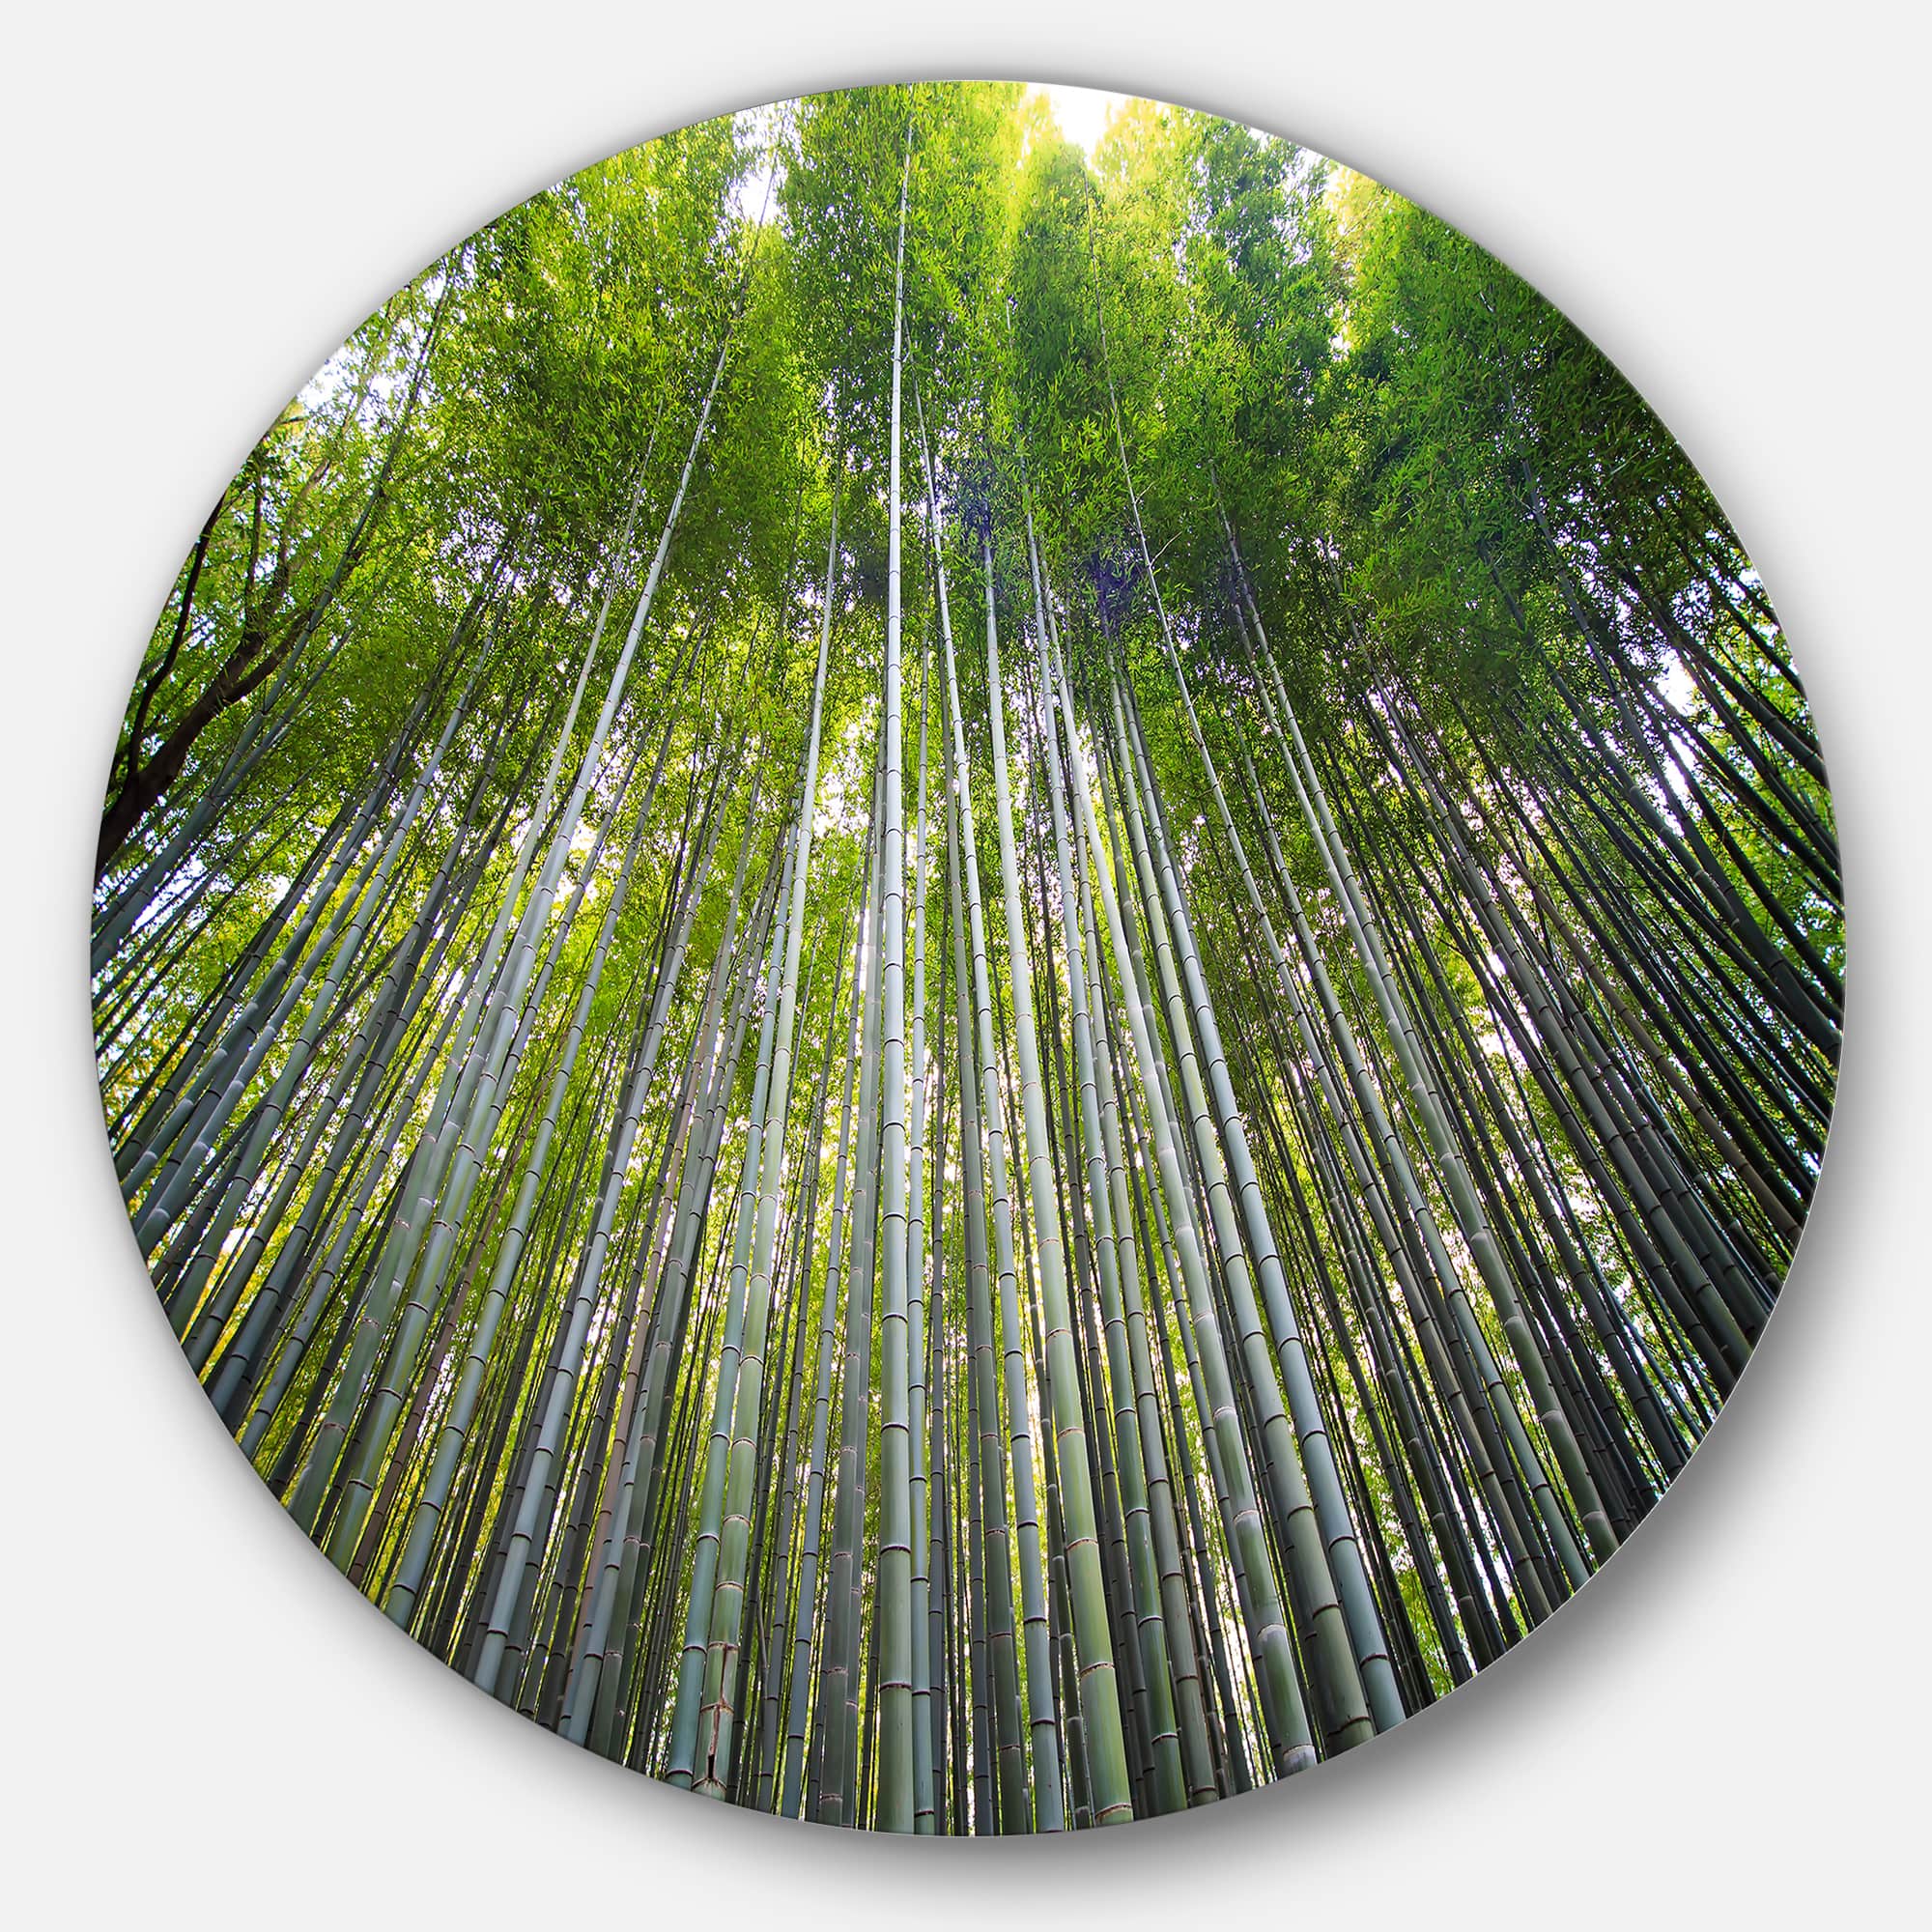 Designart - Bamboo forest of Kyoto Japan.&#x27; Forest Metal Circle Wall Art Print